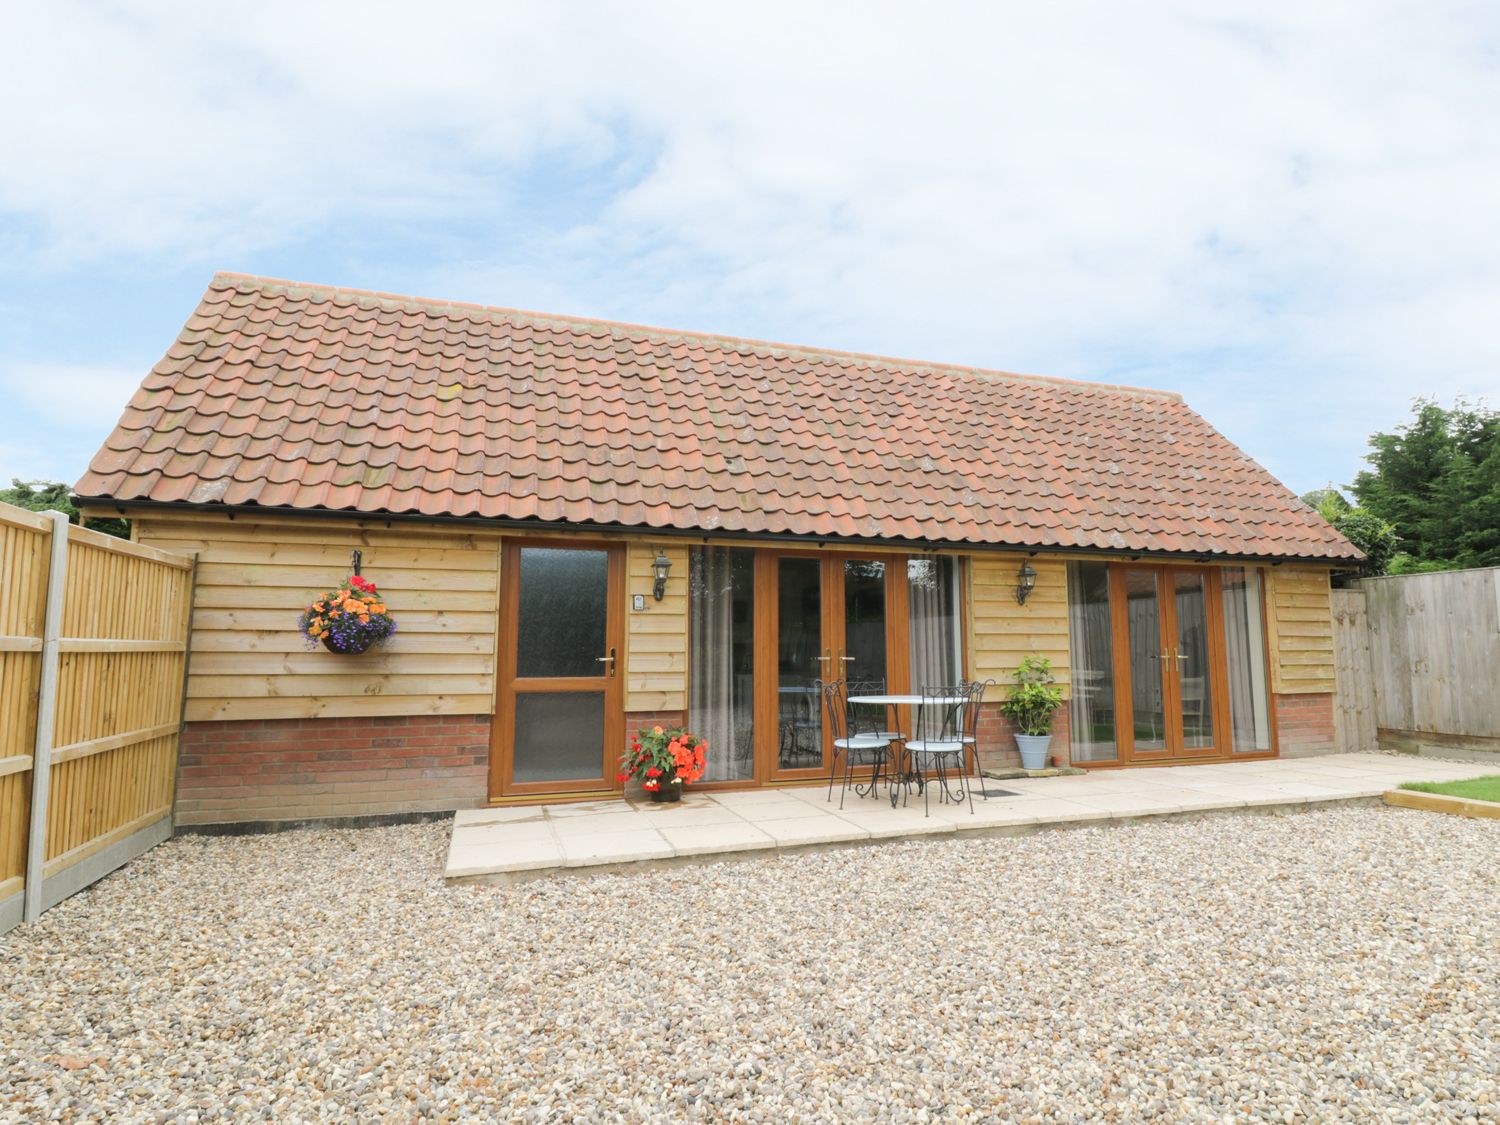 Foxley Wood Cottage - Norfolk - 955568 - photo 1